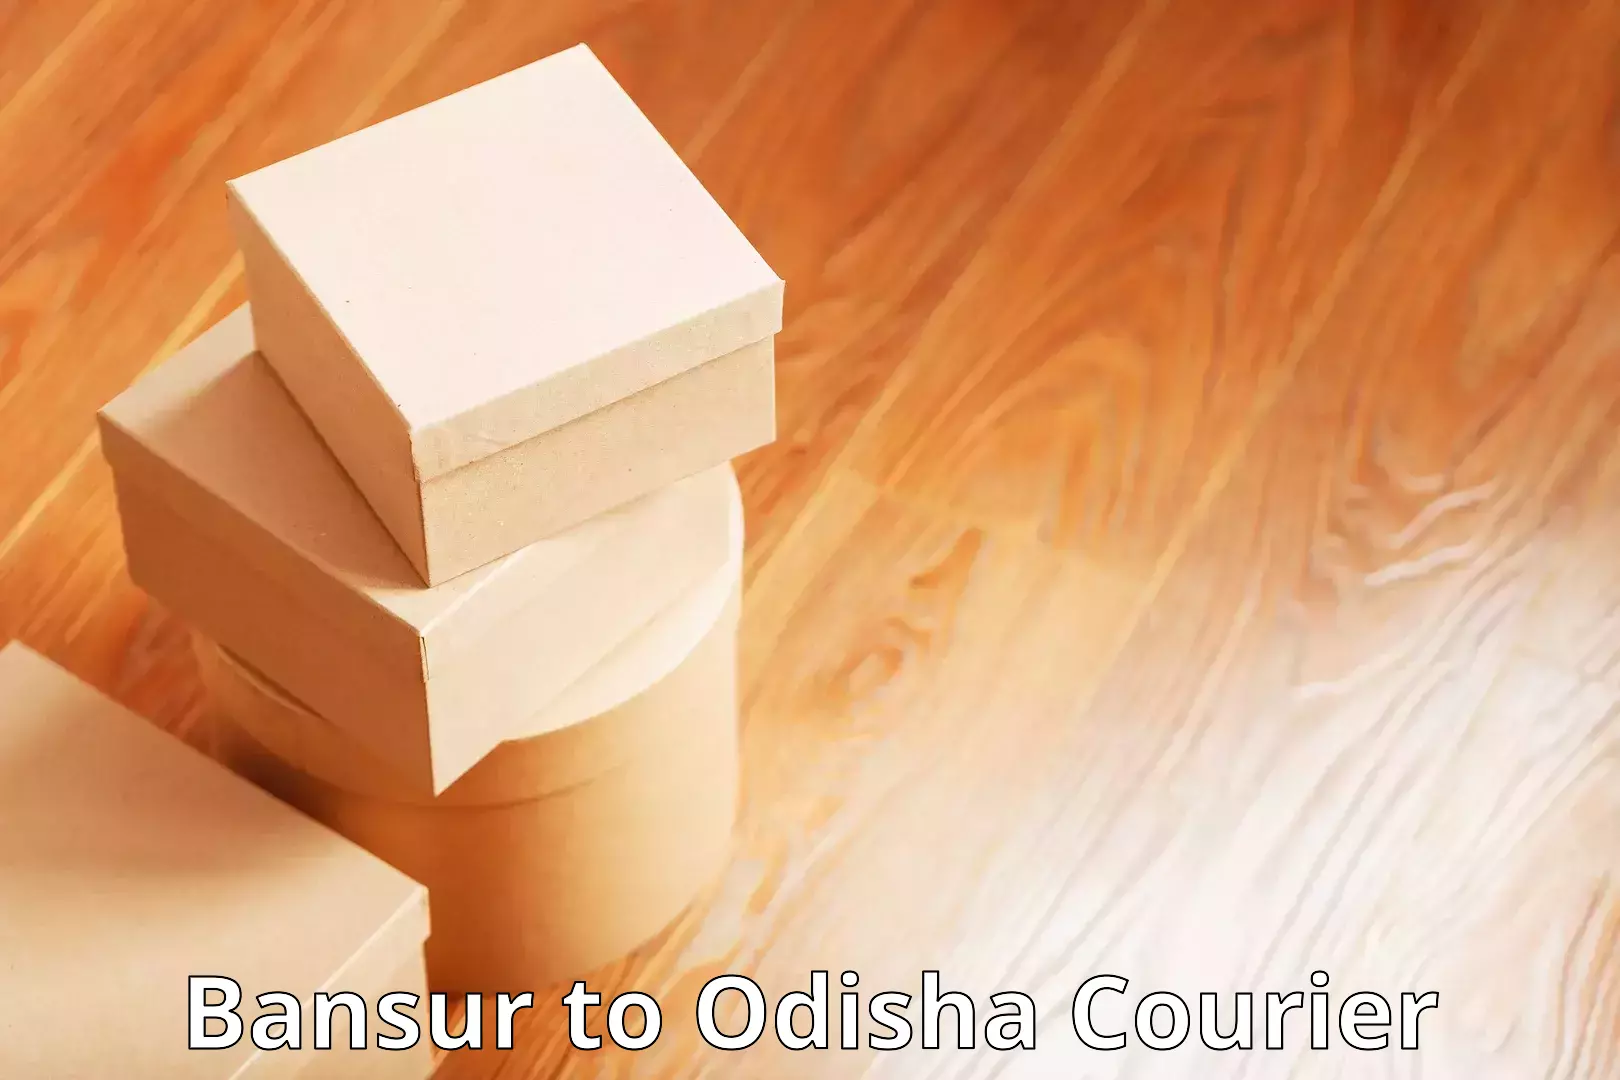 Fastest parcel delivery in Bansur to Odisha